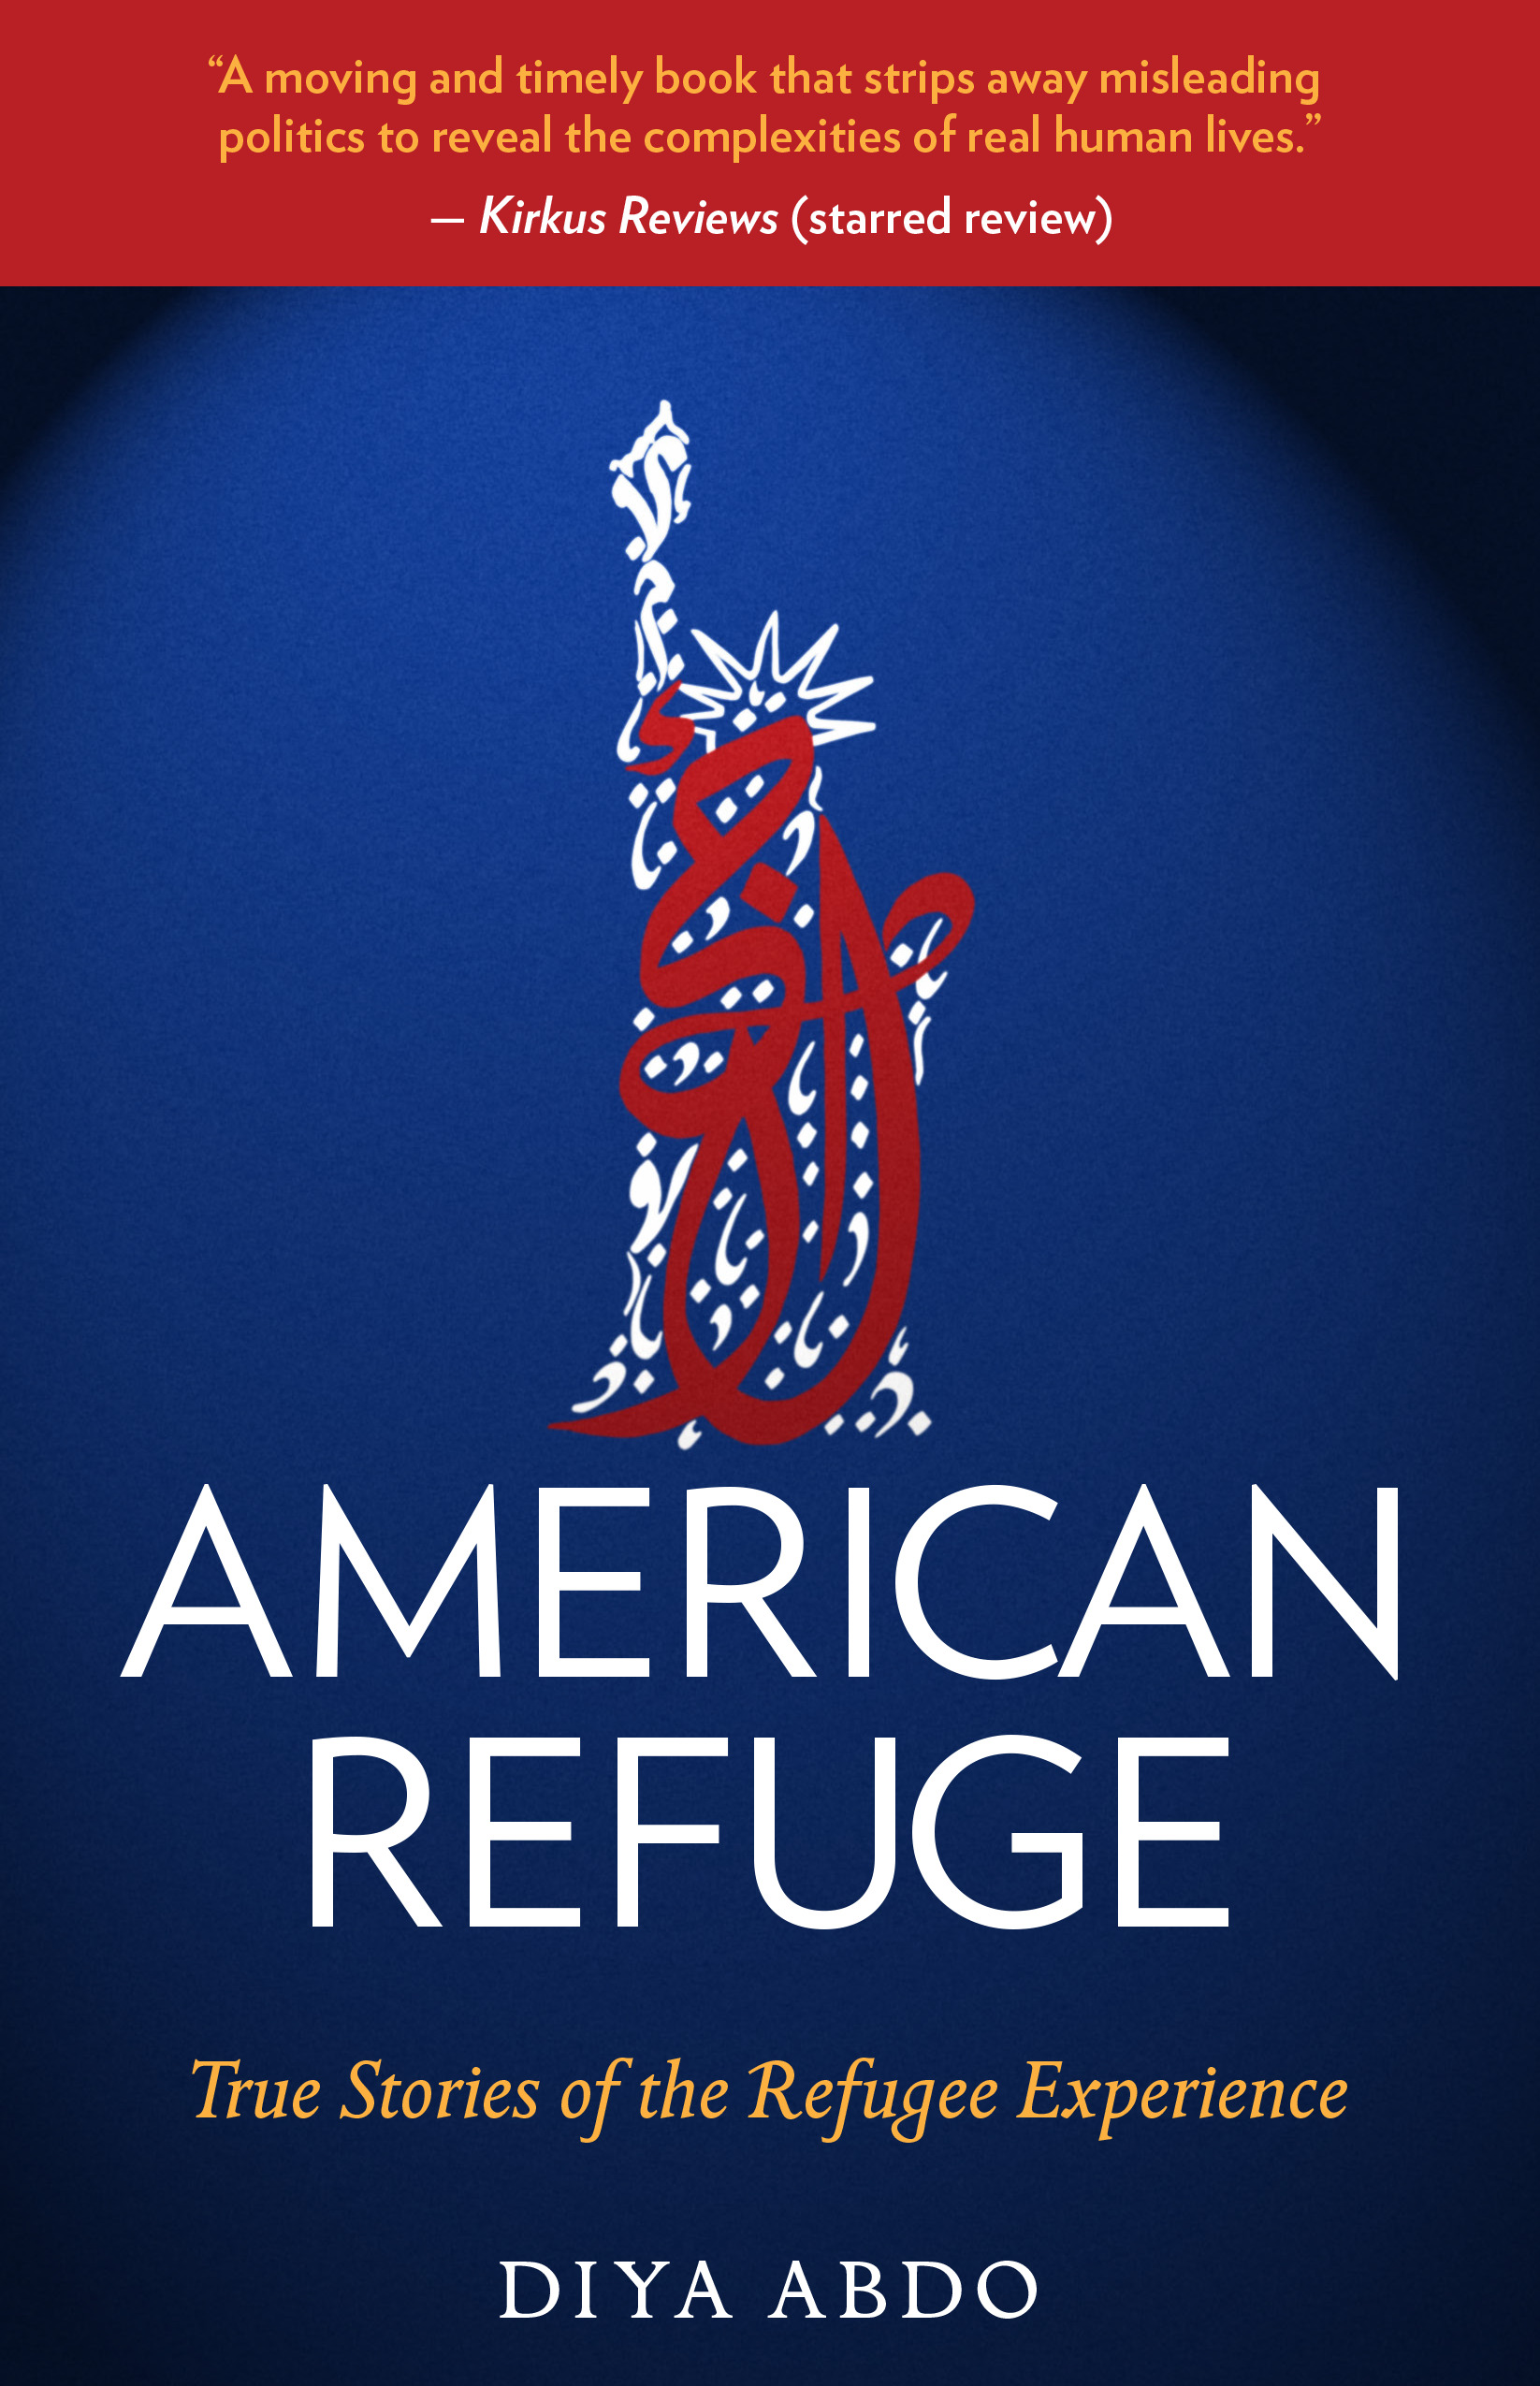 American Refuge: True Stories of the Refugee Experience by Diya Abdo Book Cover